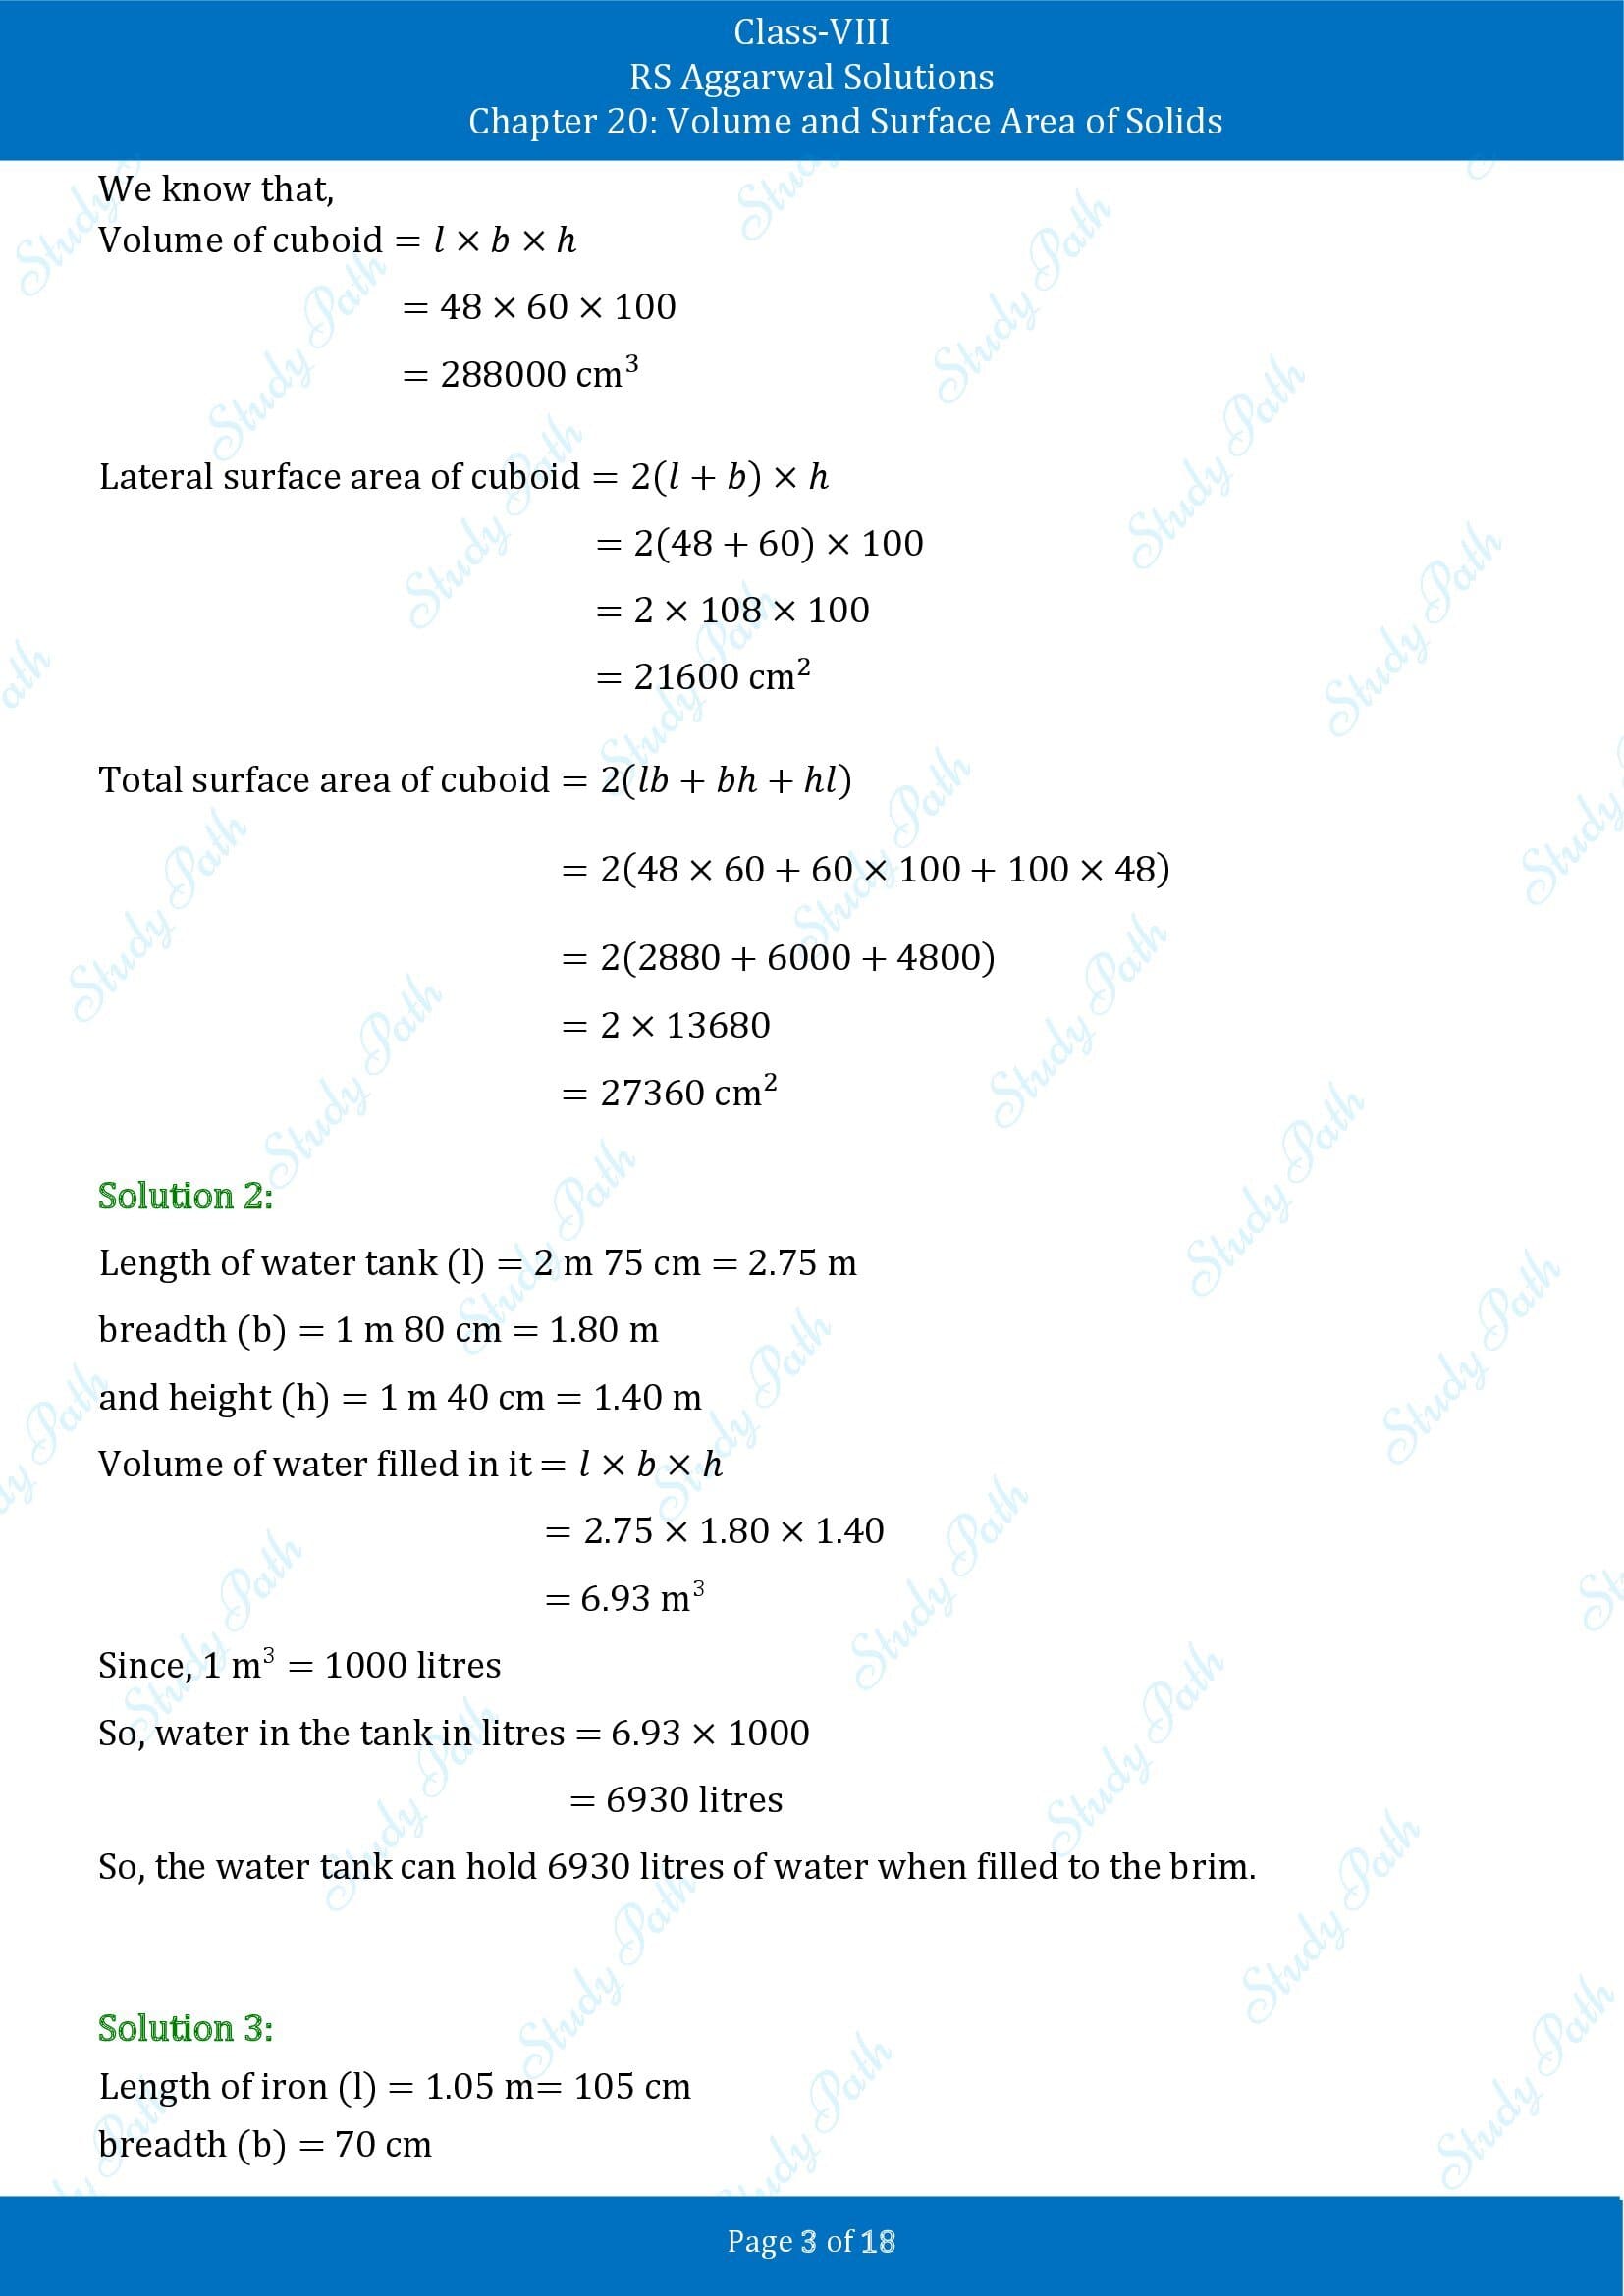 RS Aggarwal Solutions Class 8 Chapter 20 Volume and Surface Area of Solids Exercise 20A 00003